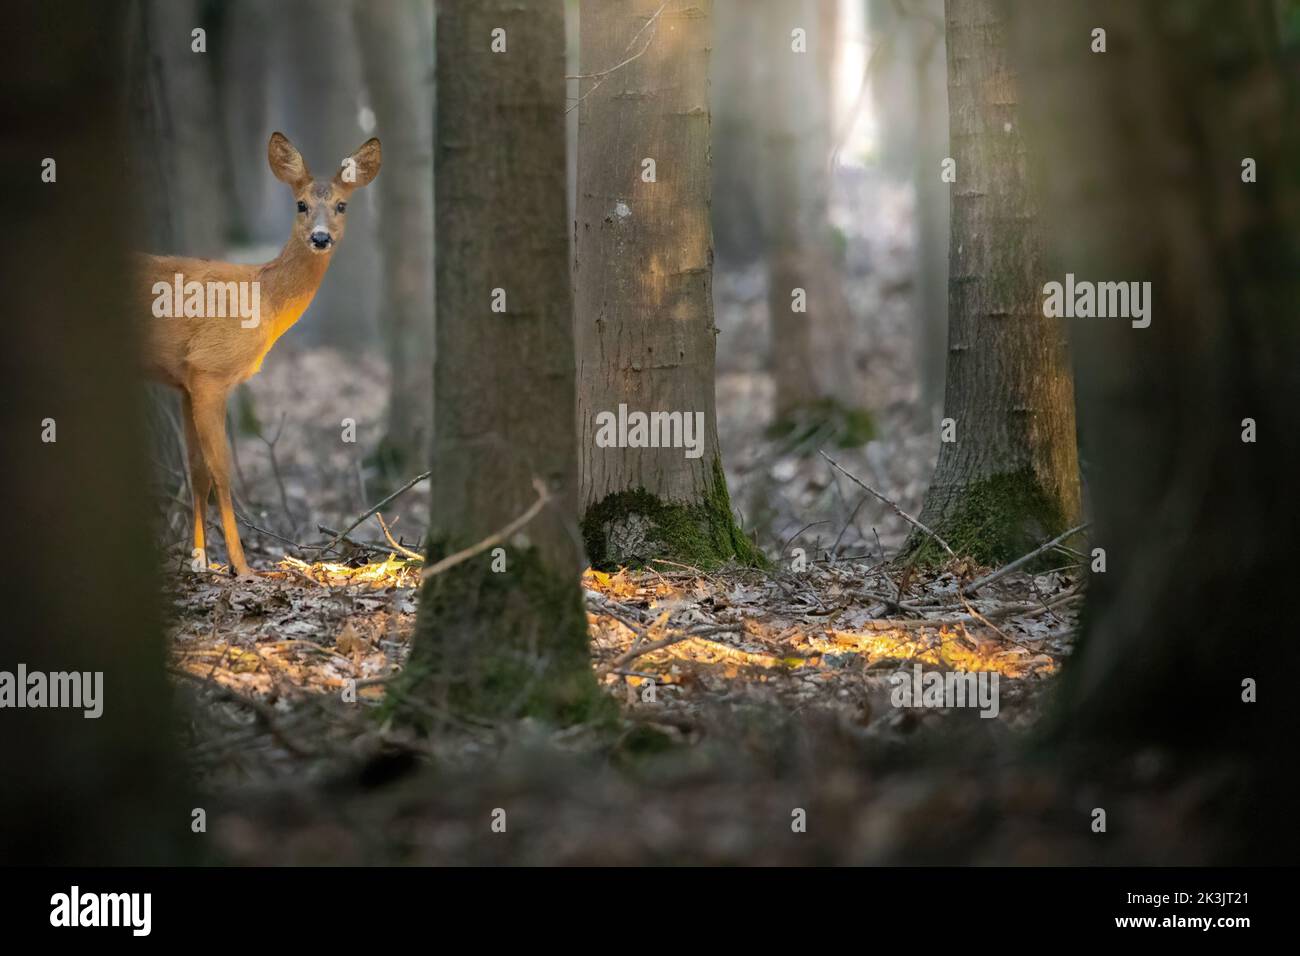 A young deer is hiding behind a tree in the forest Stock Photo